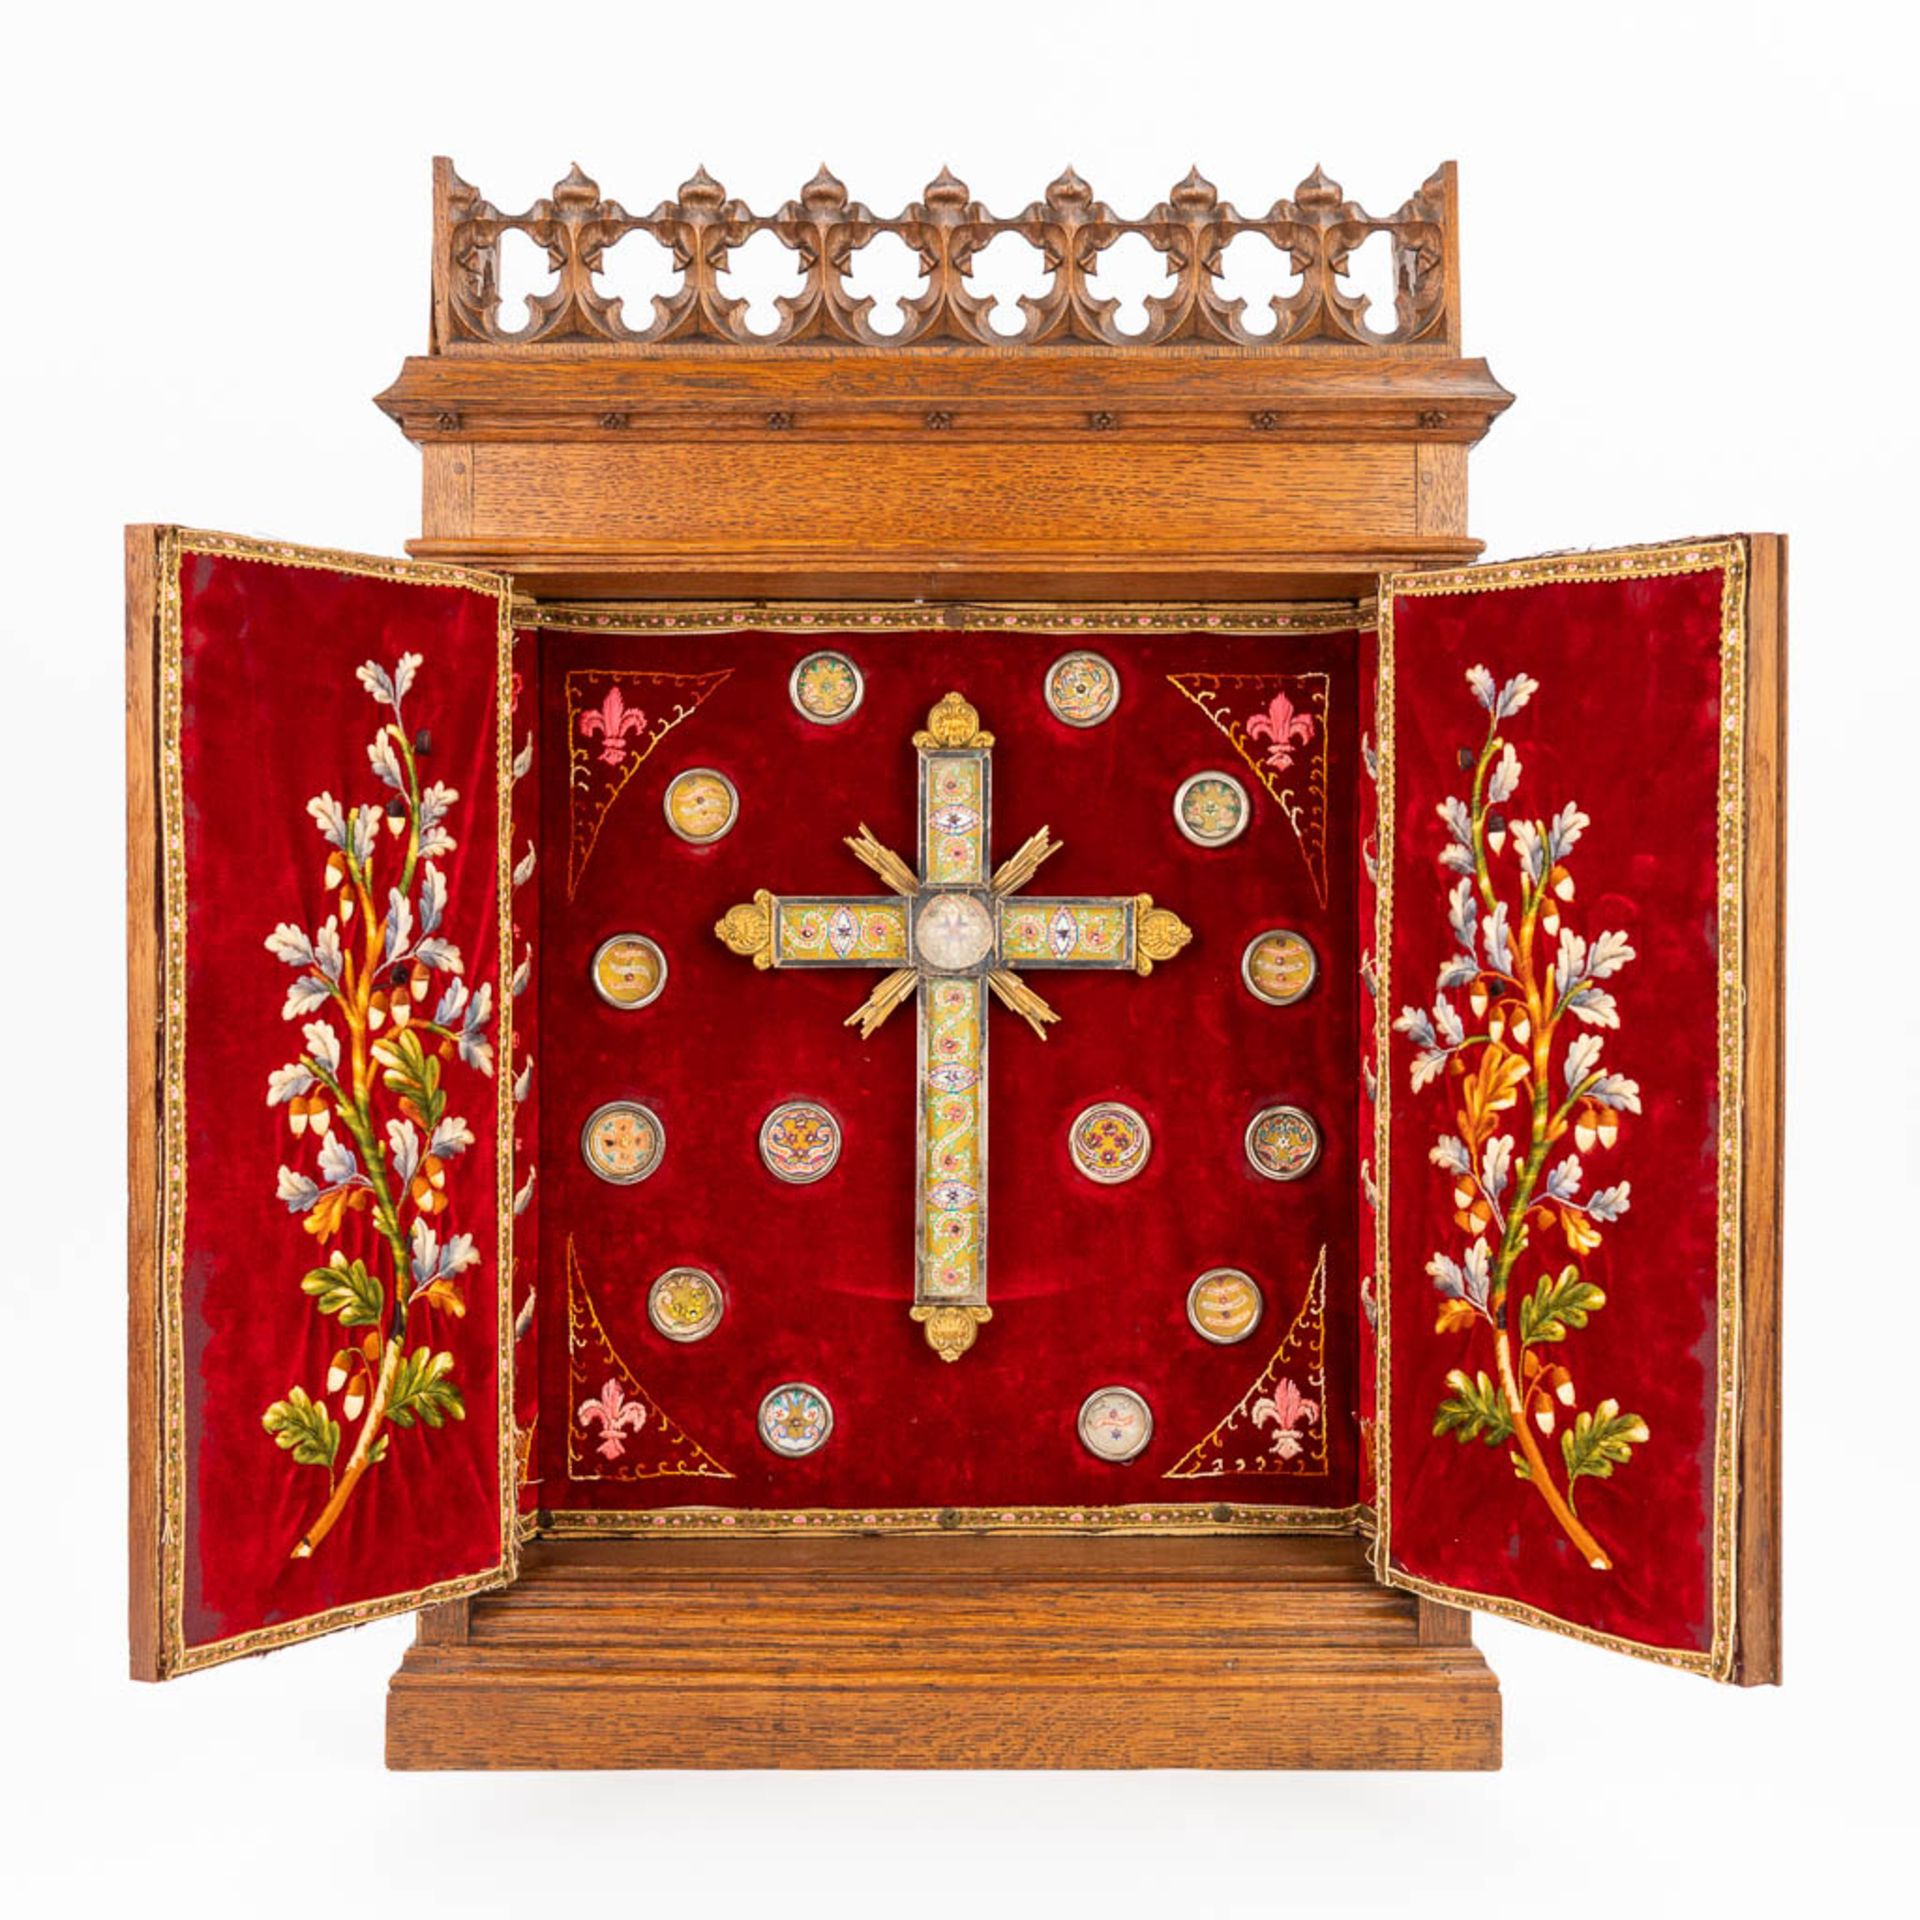 An antique reliquary box with relics a relic crucifix and embroidery. (L:13 x W:52 x H:75 cm)